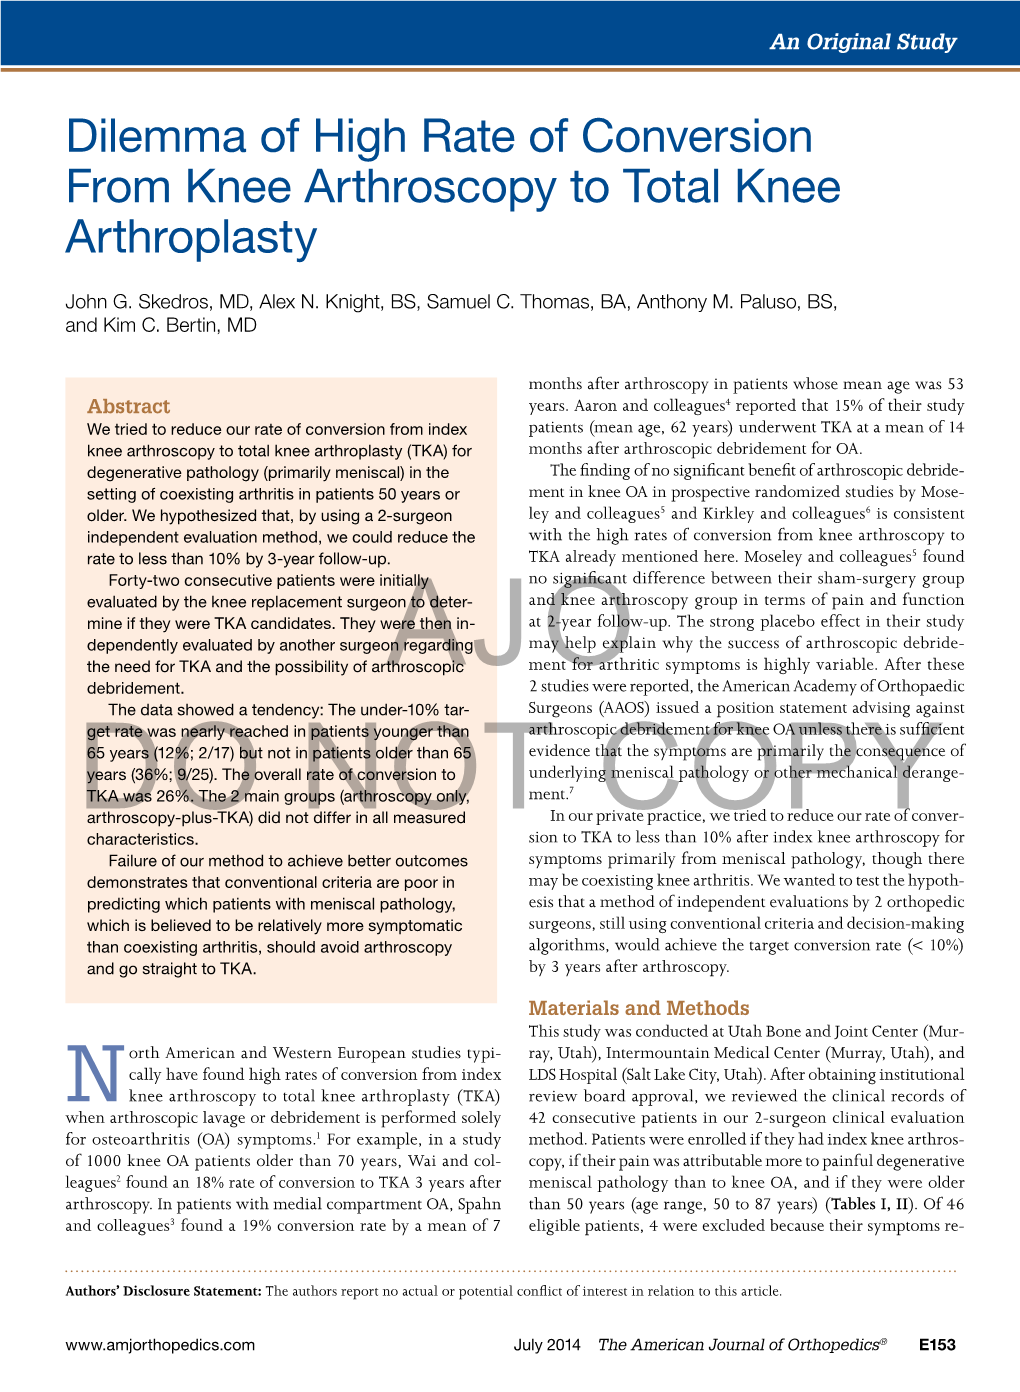 Dilemma of High Rate of Conversion from Knee Arthroscopy to Total Knee Arthroplasty